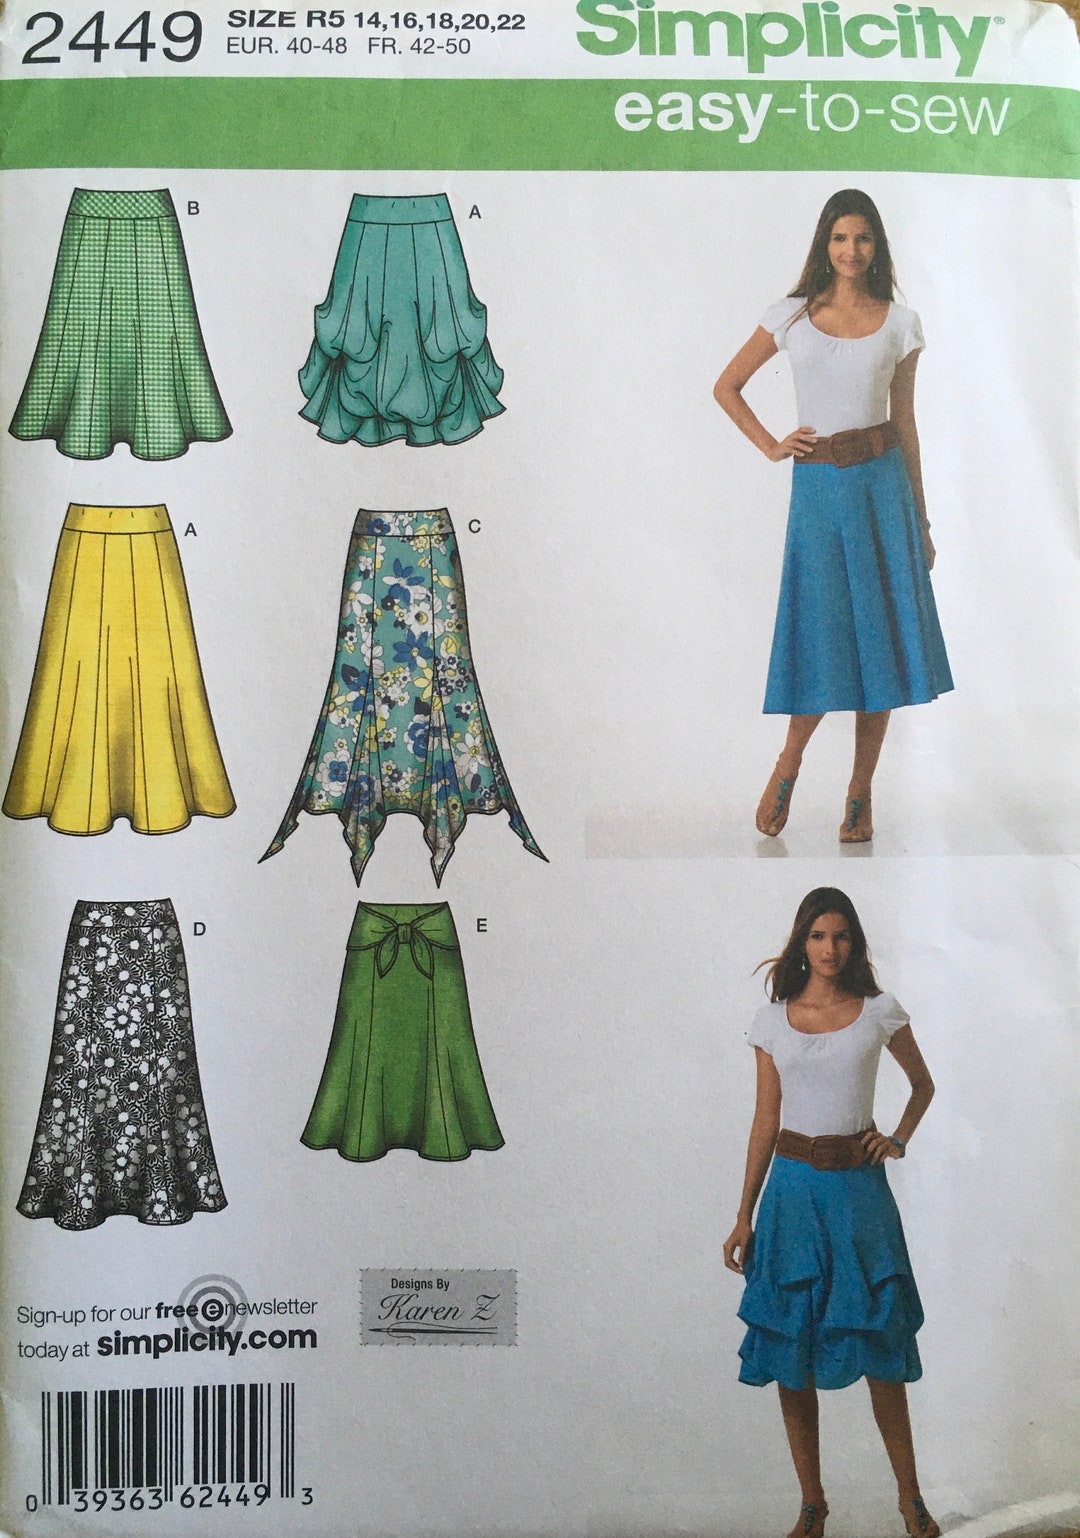 Simplicity 2449 Sewing Pattern UNCUT - Etsy